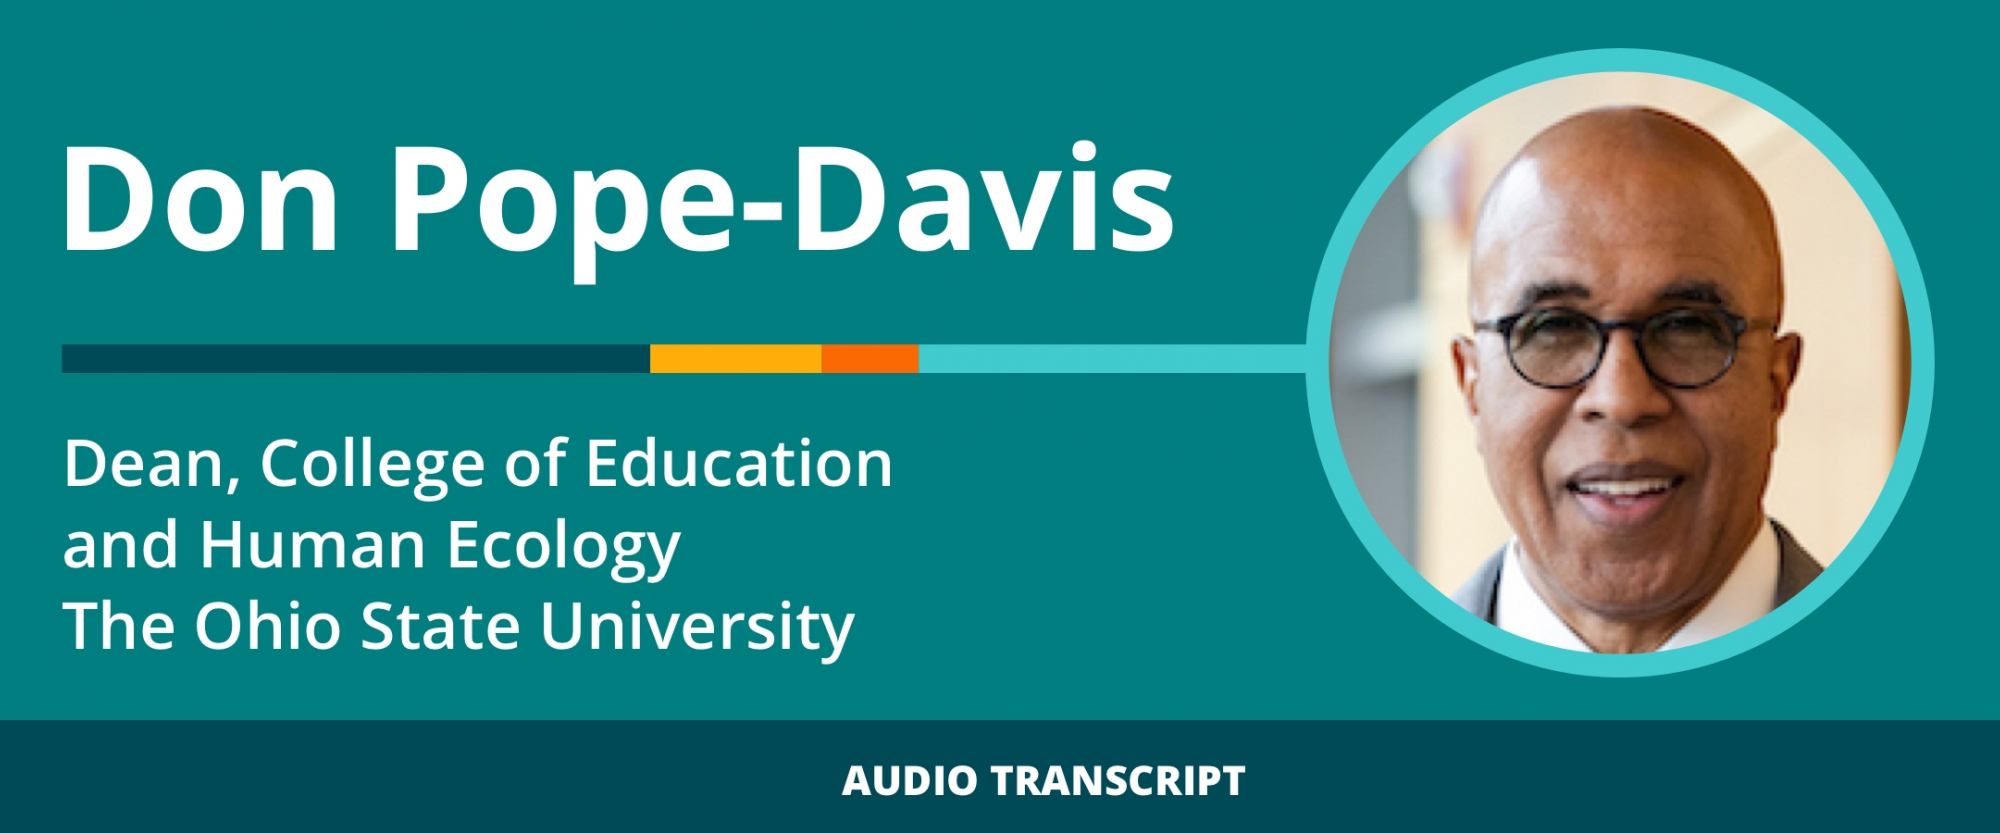 Scholarship to Practice 9/16/21: Transcript of Conversation With Don Pope-Davis, Dean, College of Education and Human Ecology, The Ohio State University